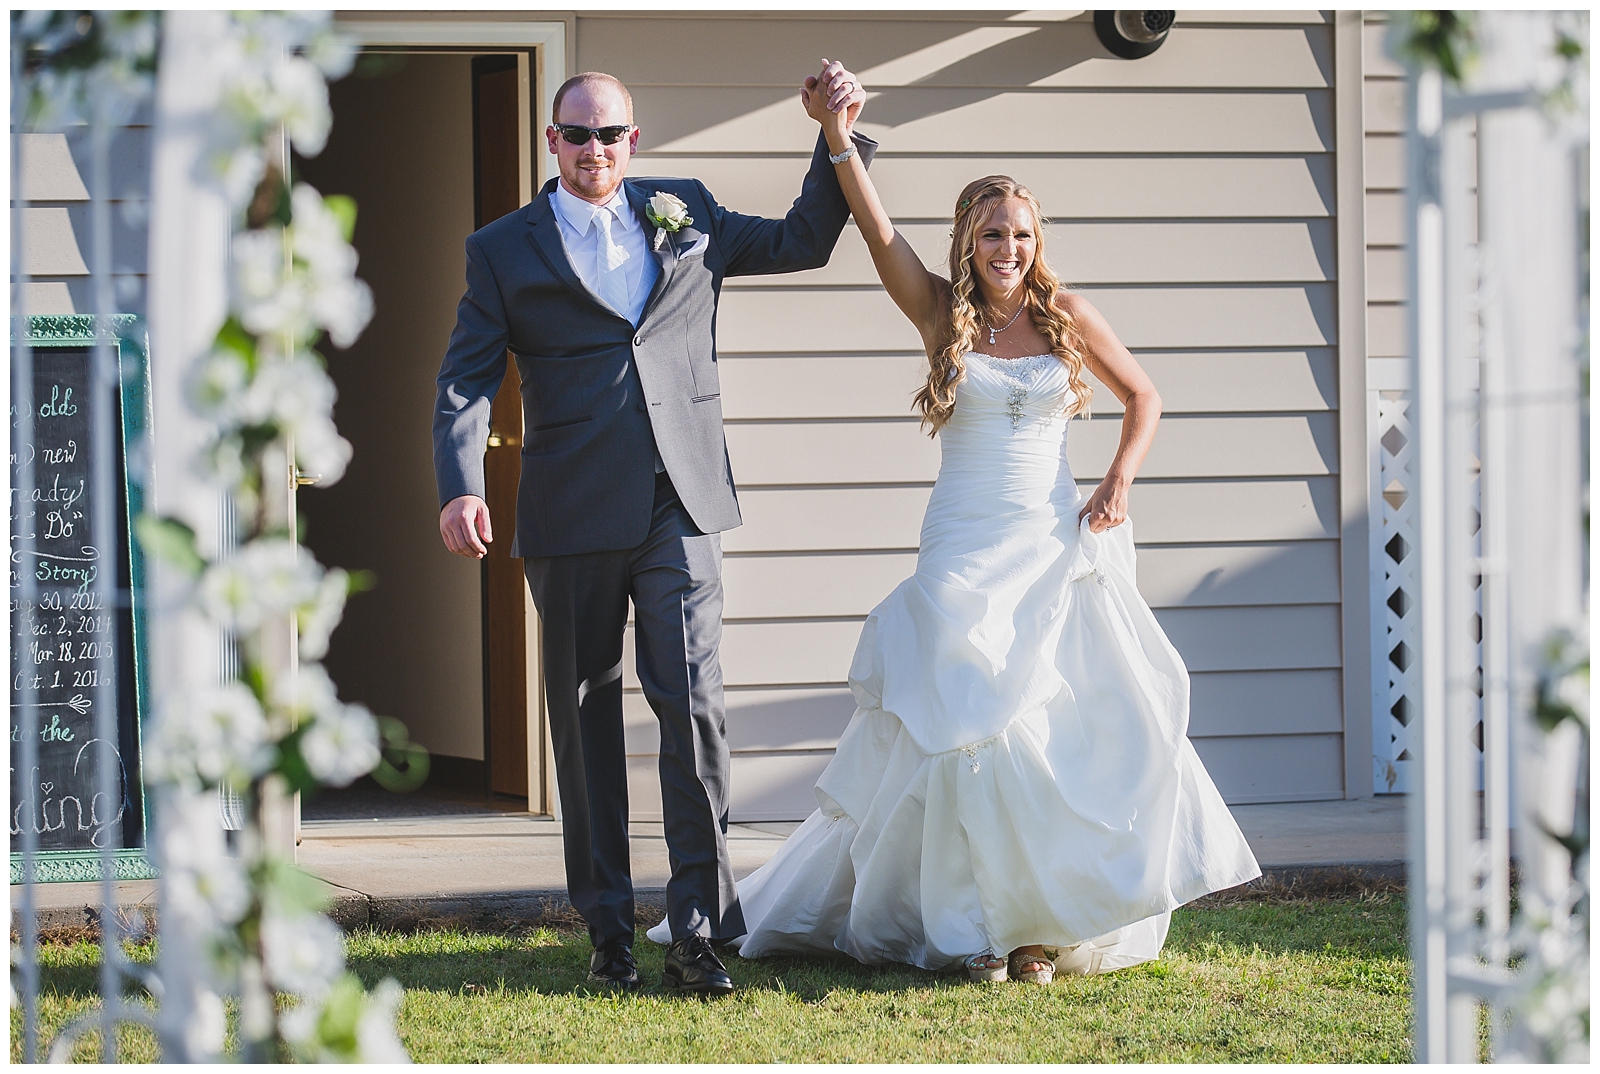 Wedding photography in Trousdale, Kansas, by Kansas City wedding photographers Wisdom-Watson Weddings.